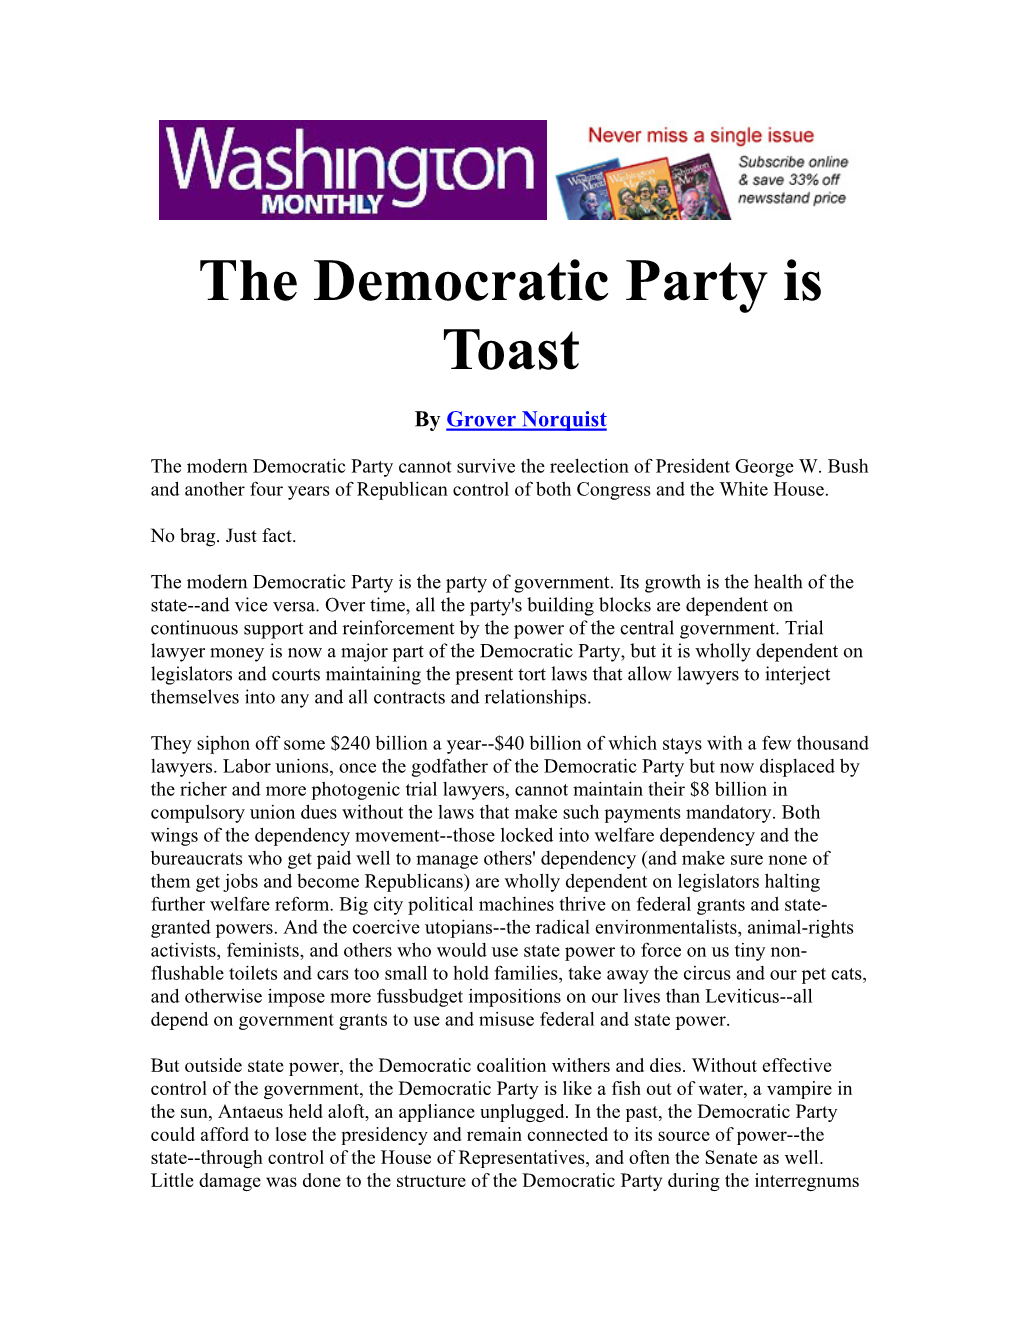 The Democratic Party Is Toast